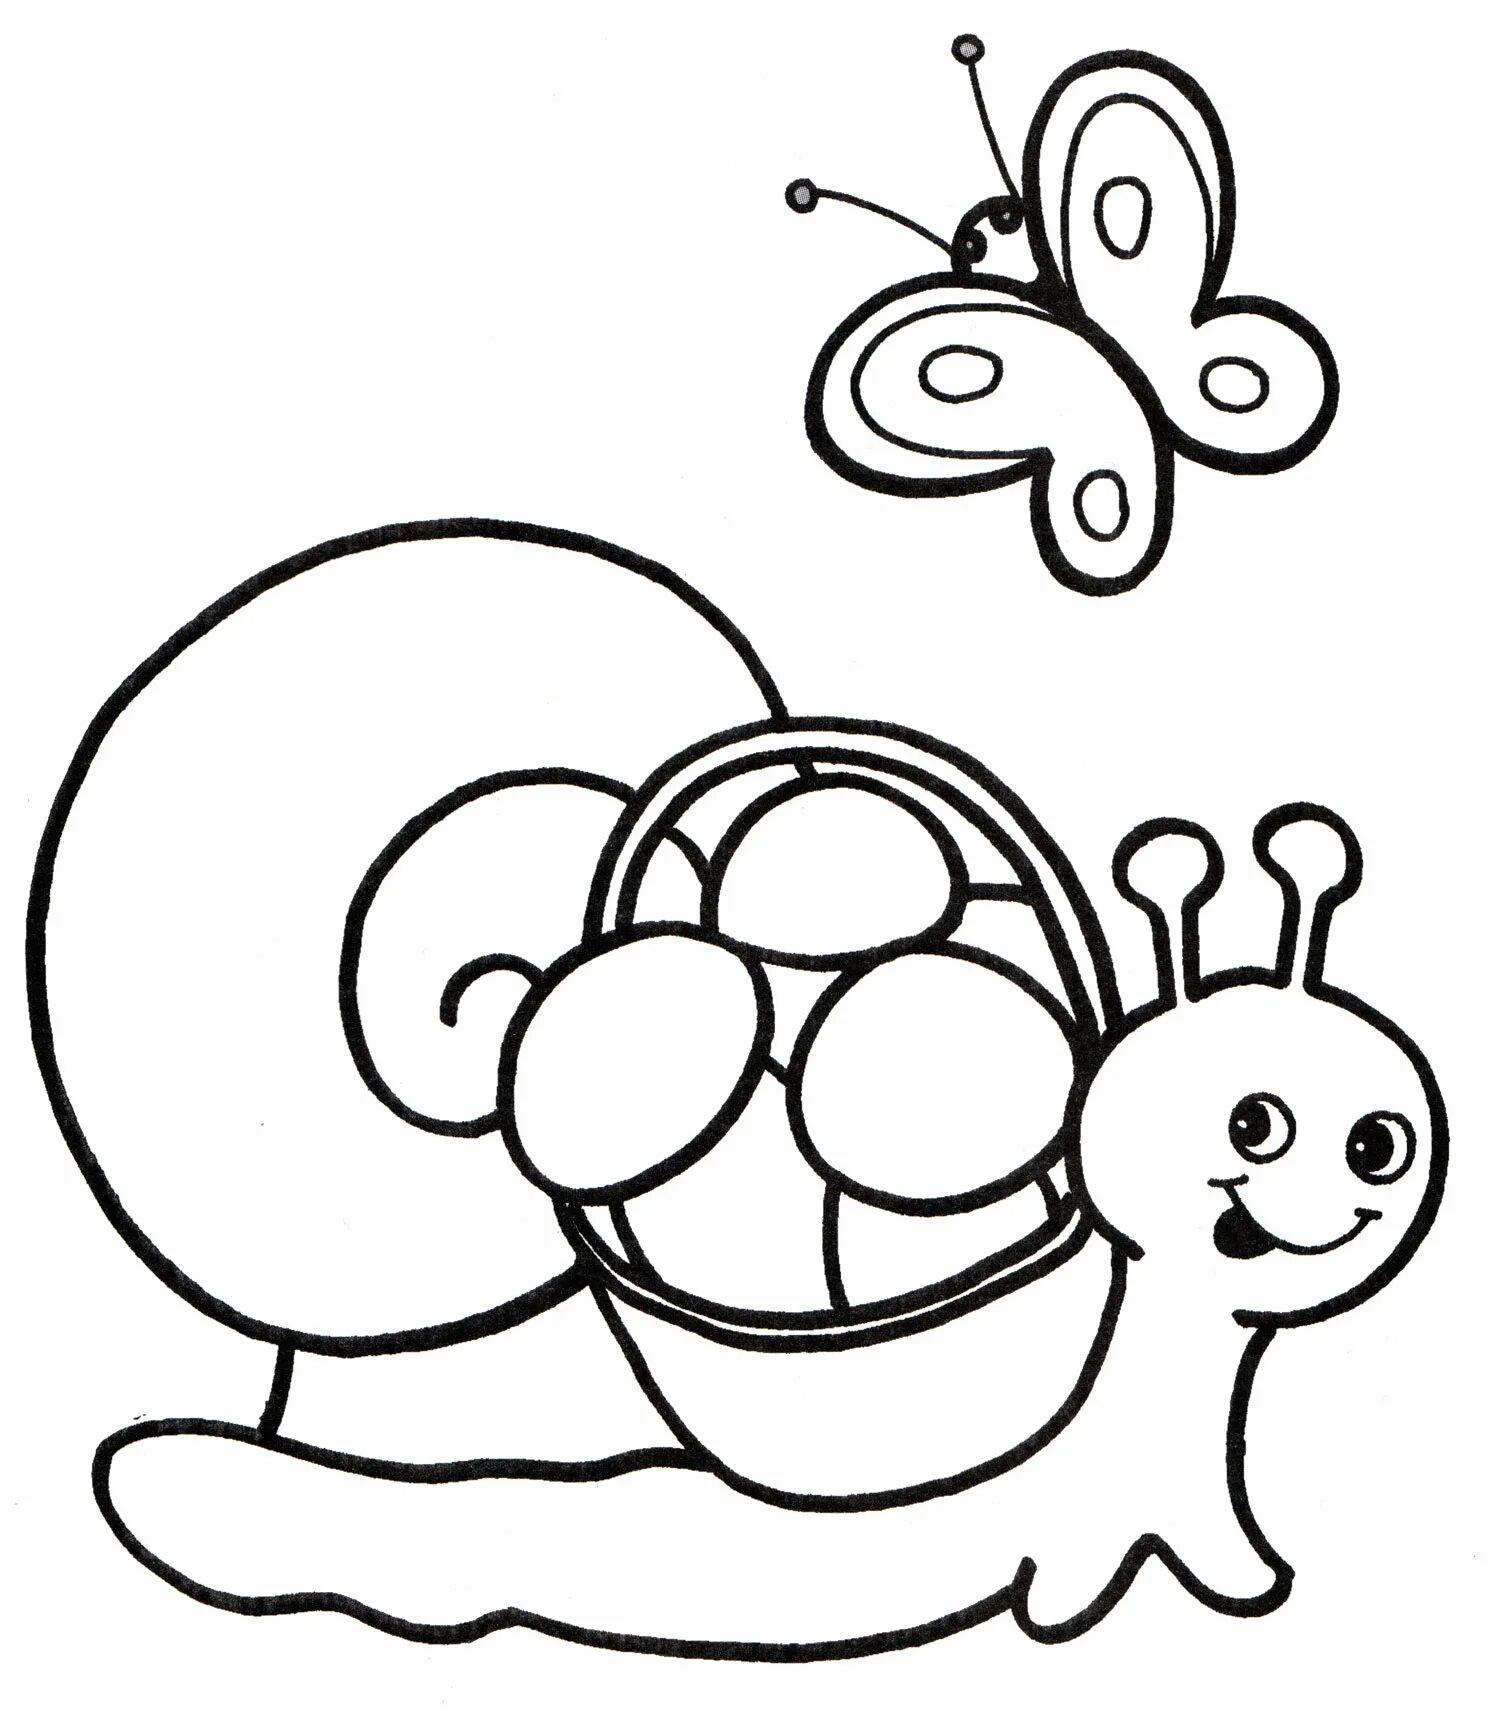 Crazy snail coloring book for 3-4 year olds